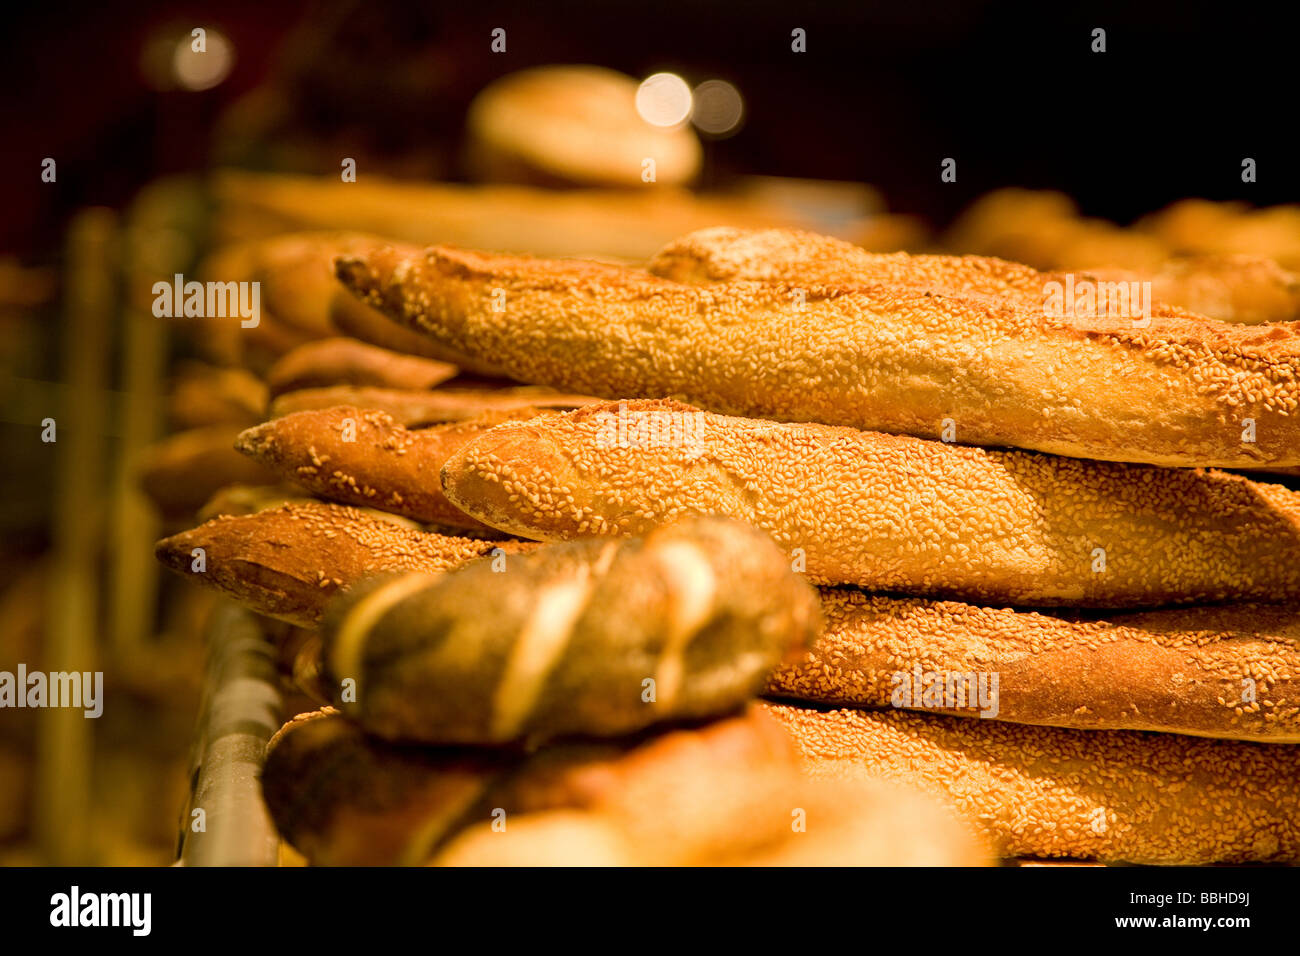 Crusty bread displayed in Paris France Stock Photo